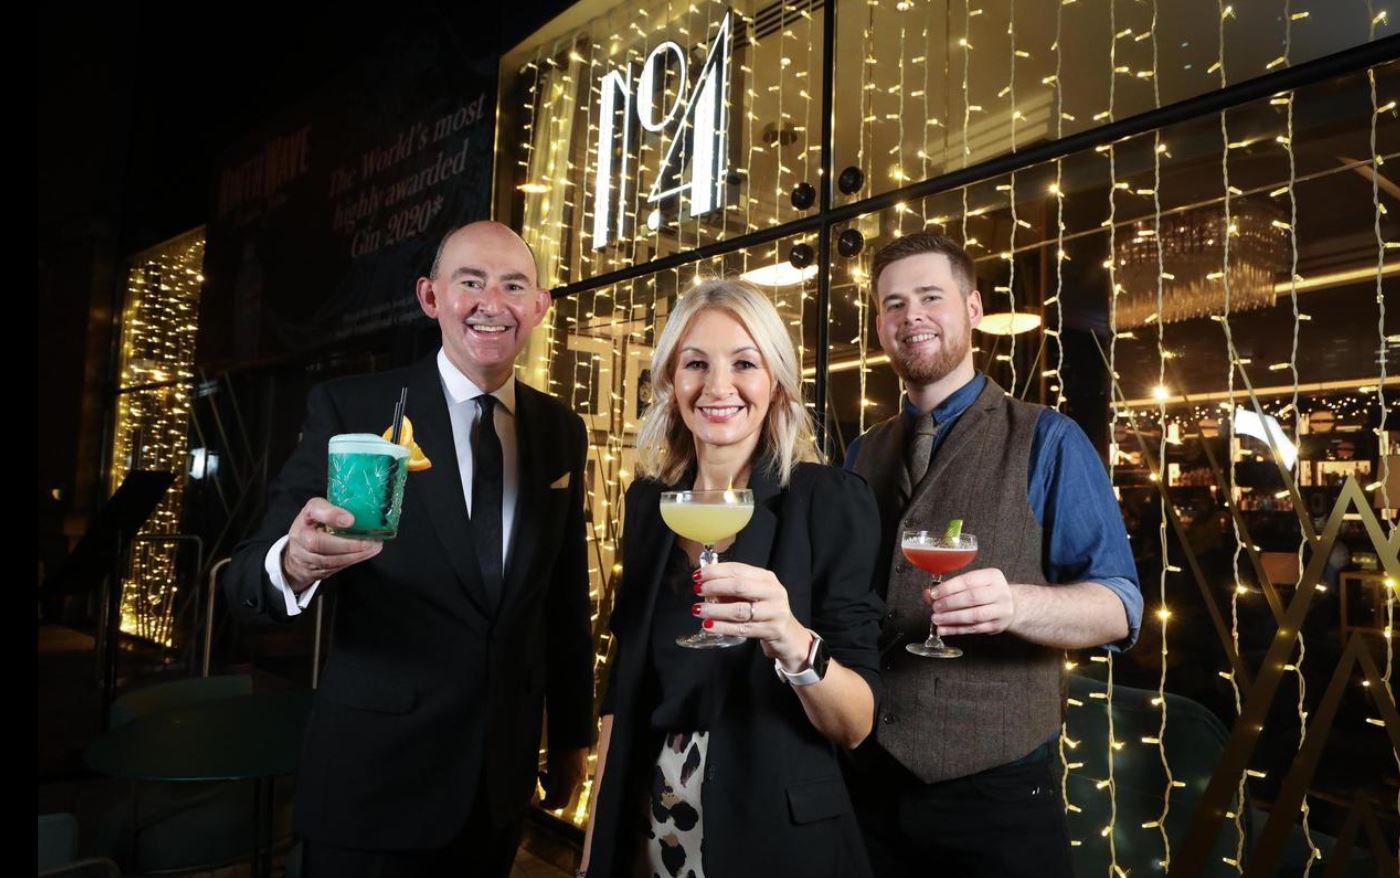 No. 4 brings Roaring Twenties glamour to city centre